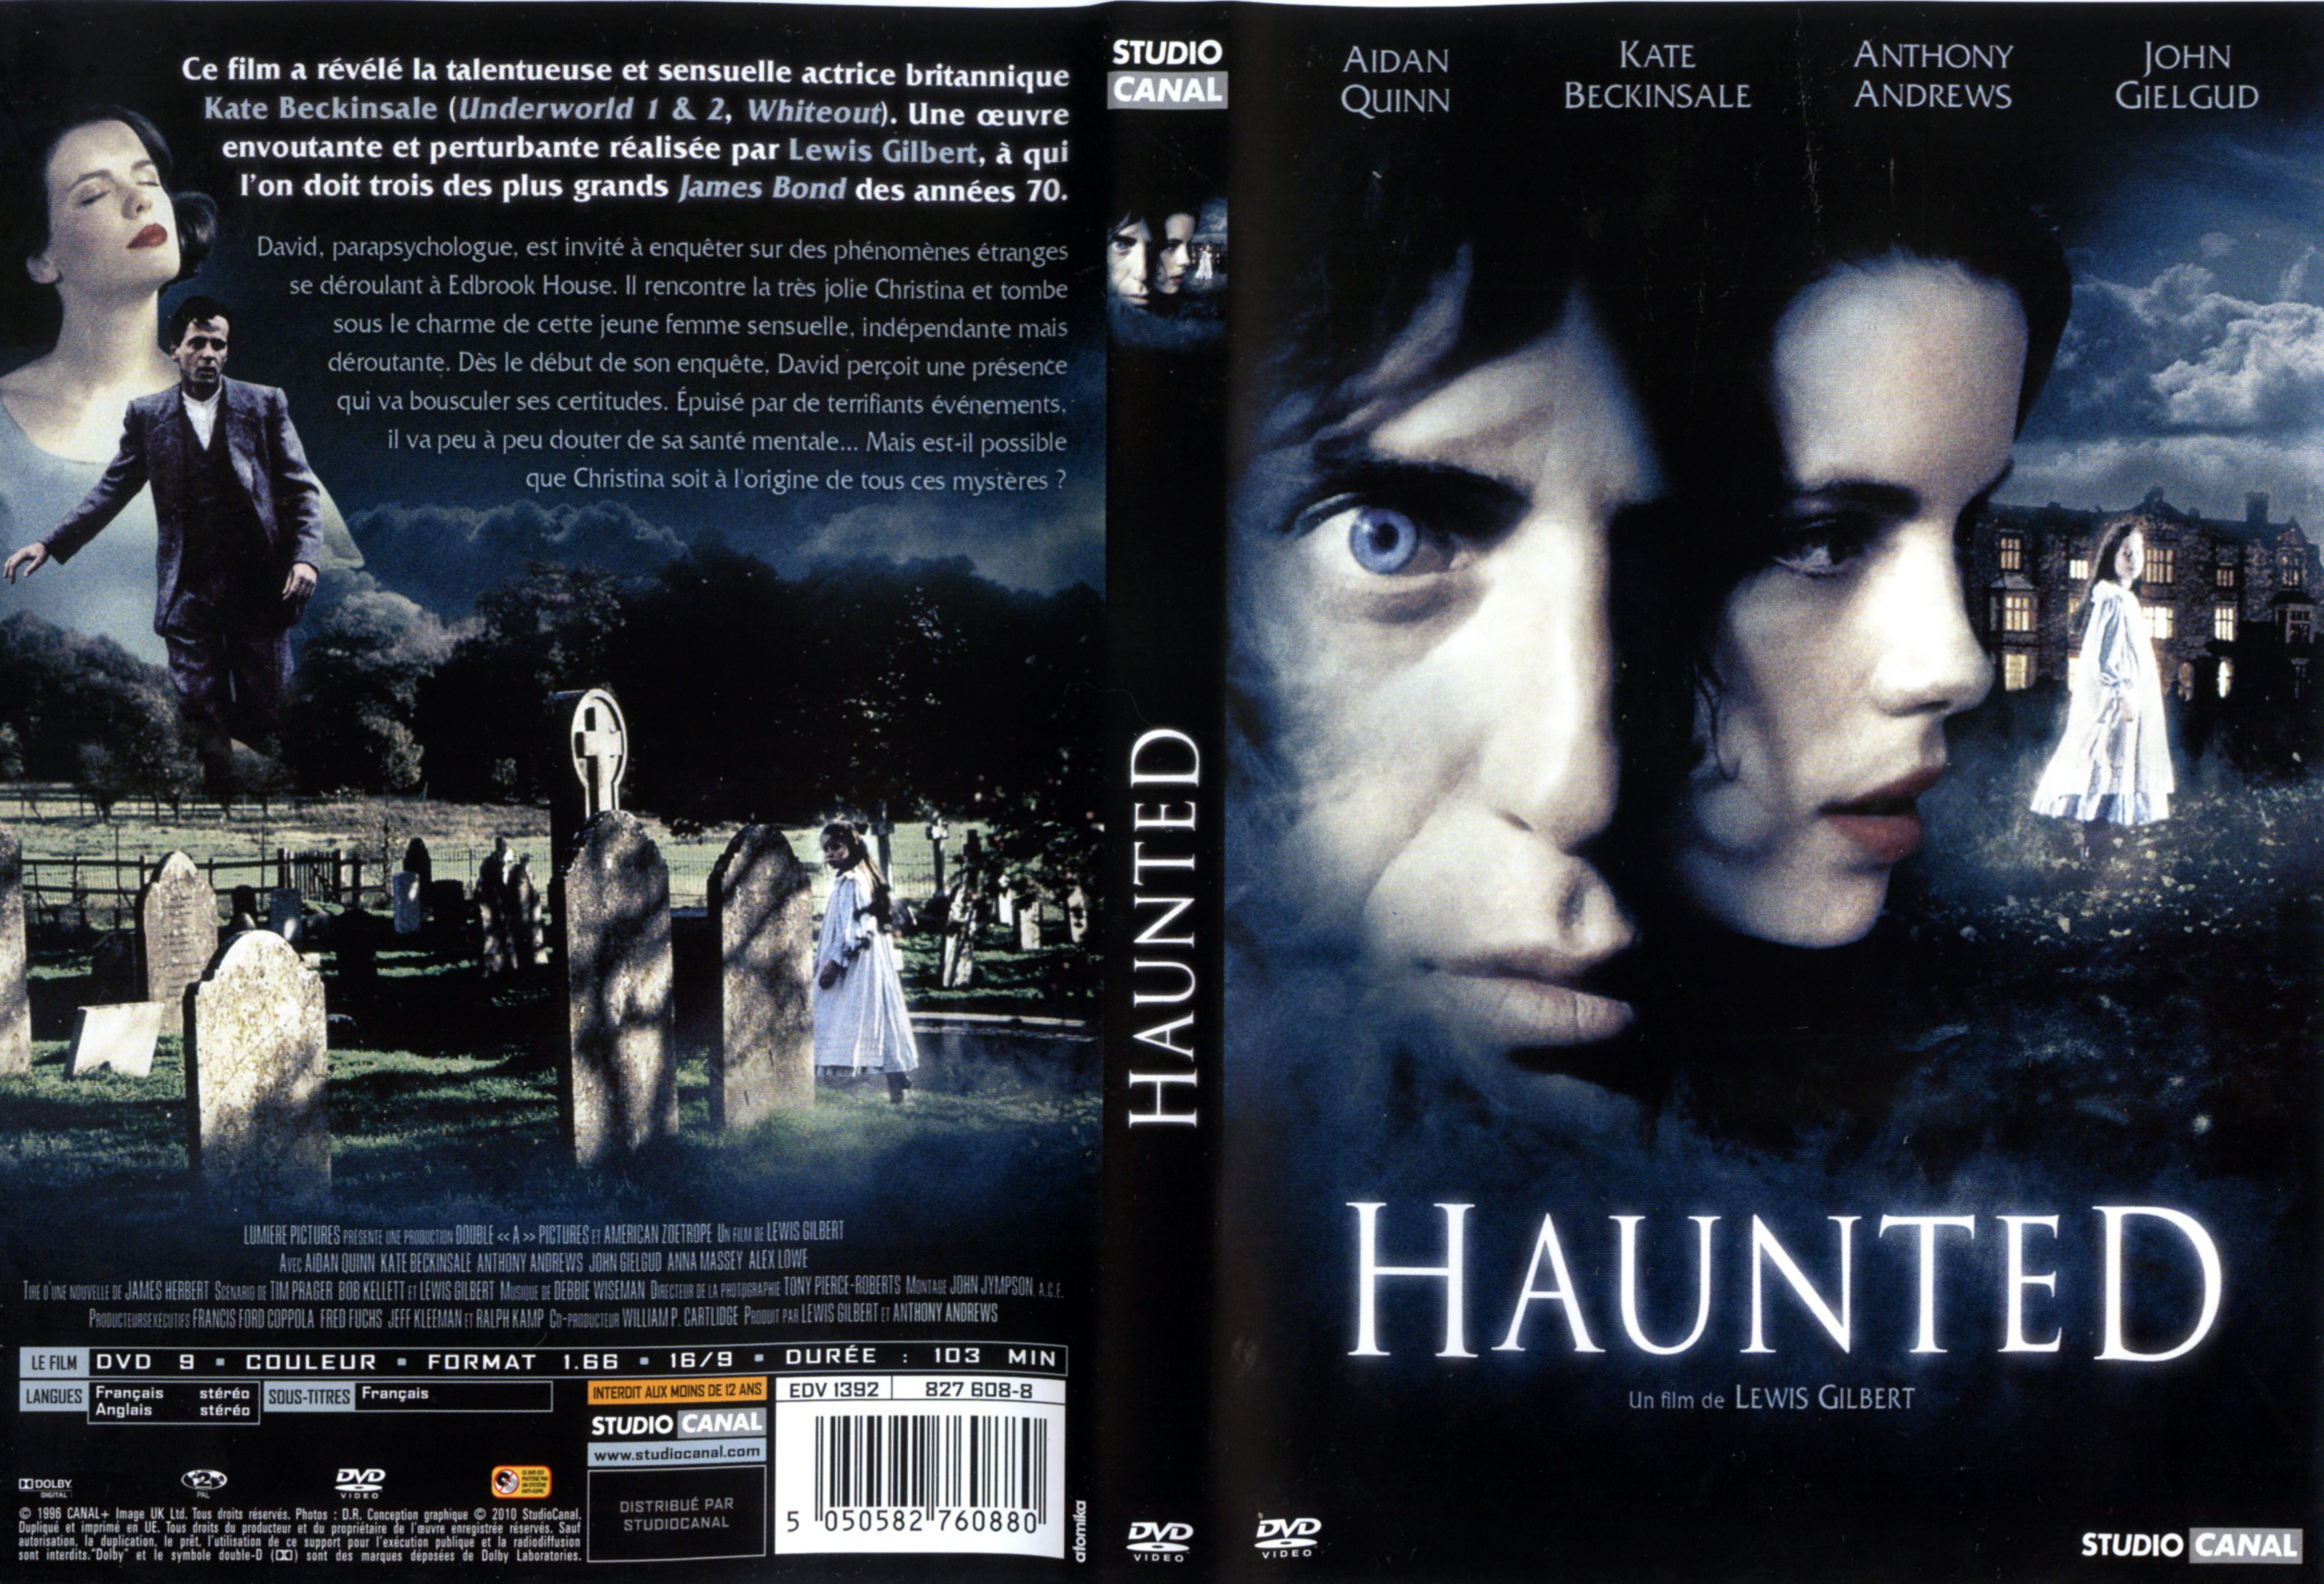 Jaquette DVD Haunted